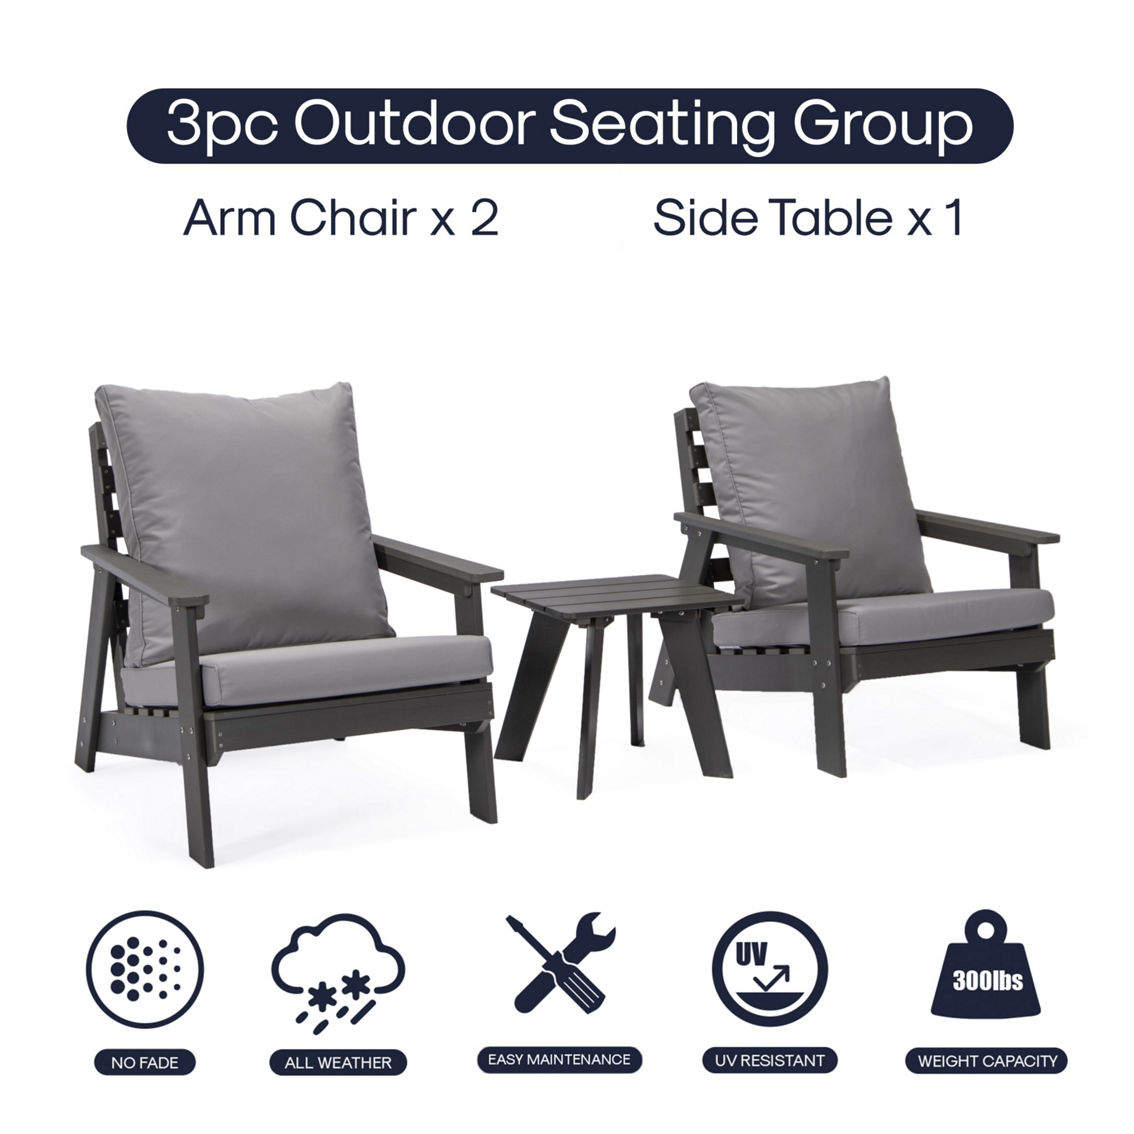 Inspired Home Hiba Outdoor 3pc Seating Group - Image 2 of 5